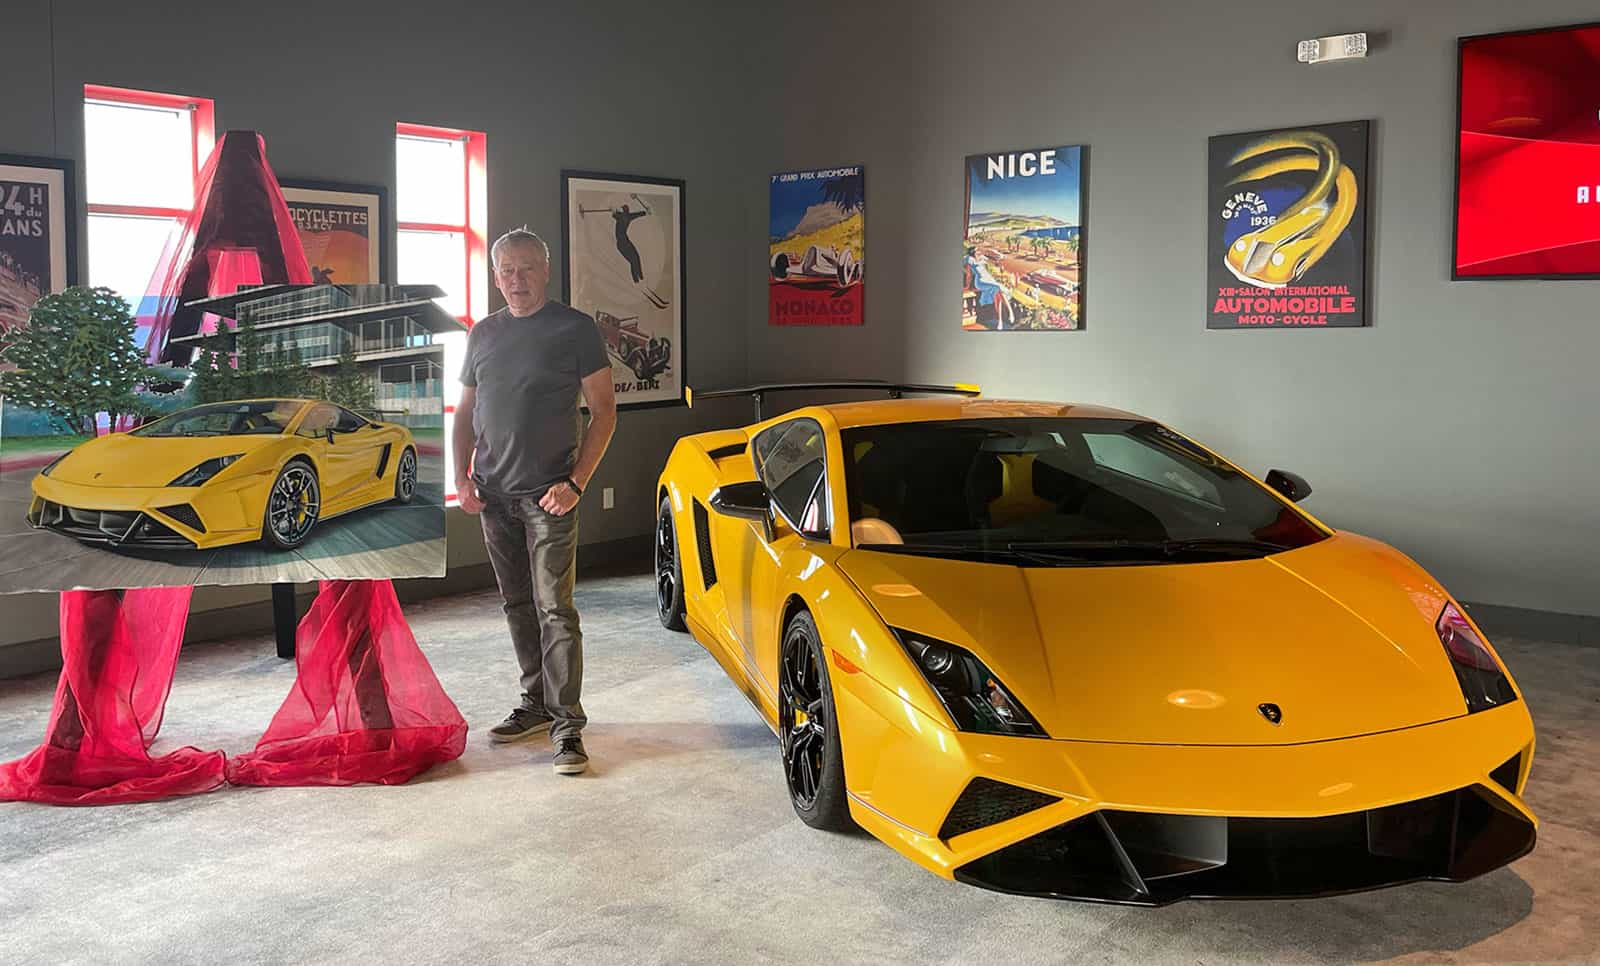 A.D. Cook with Painting and Lambo